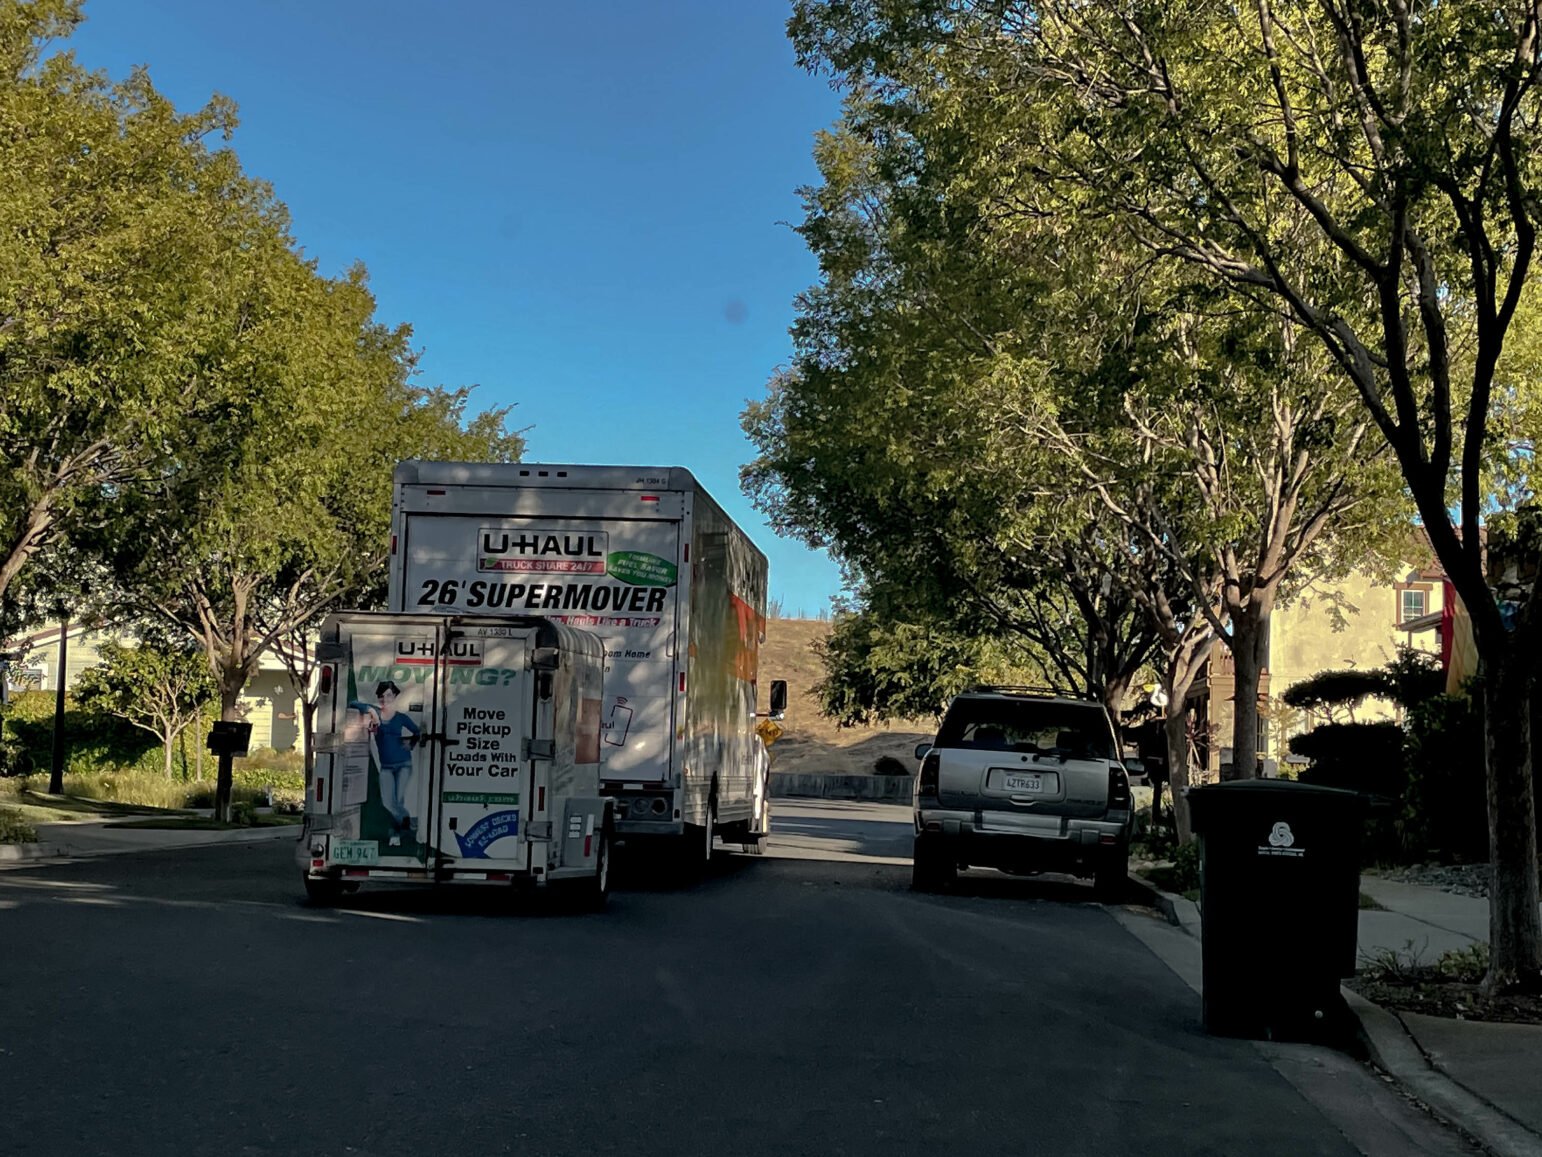 A large U-Haul moving truck labeled '26' Super Mover' is parked on a suburban street during daylight. Behind it, a smaller U-Haul trailer is attached. Trees line the street, and a few houses are visible in the background.